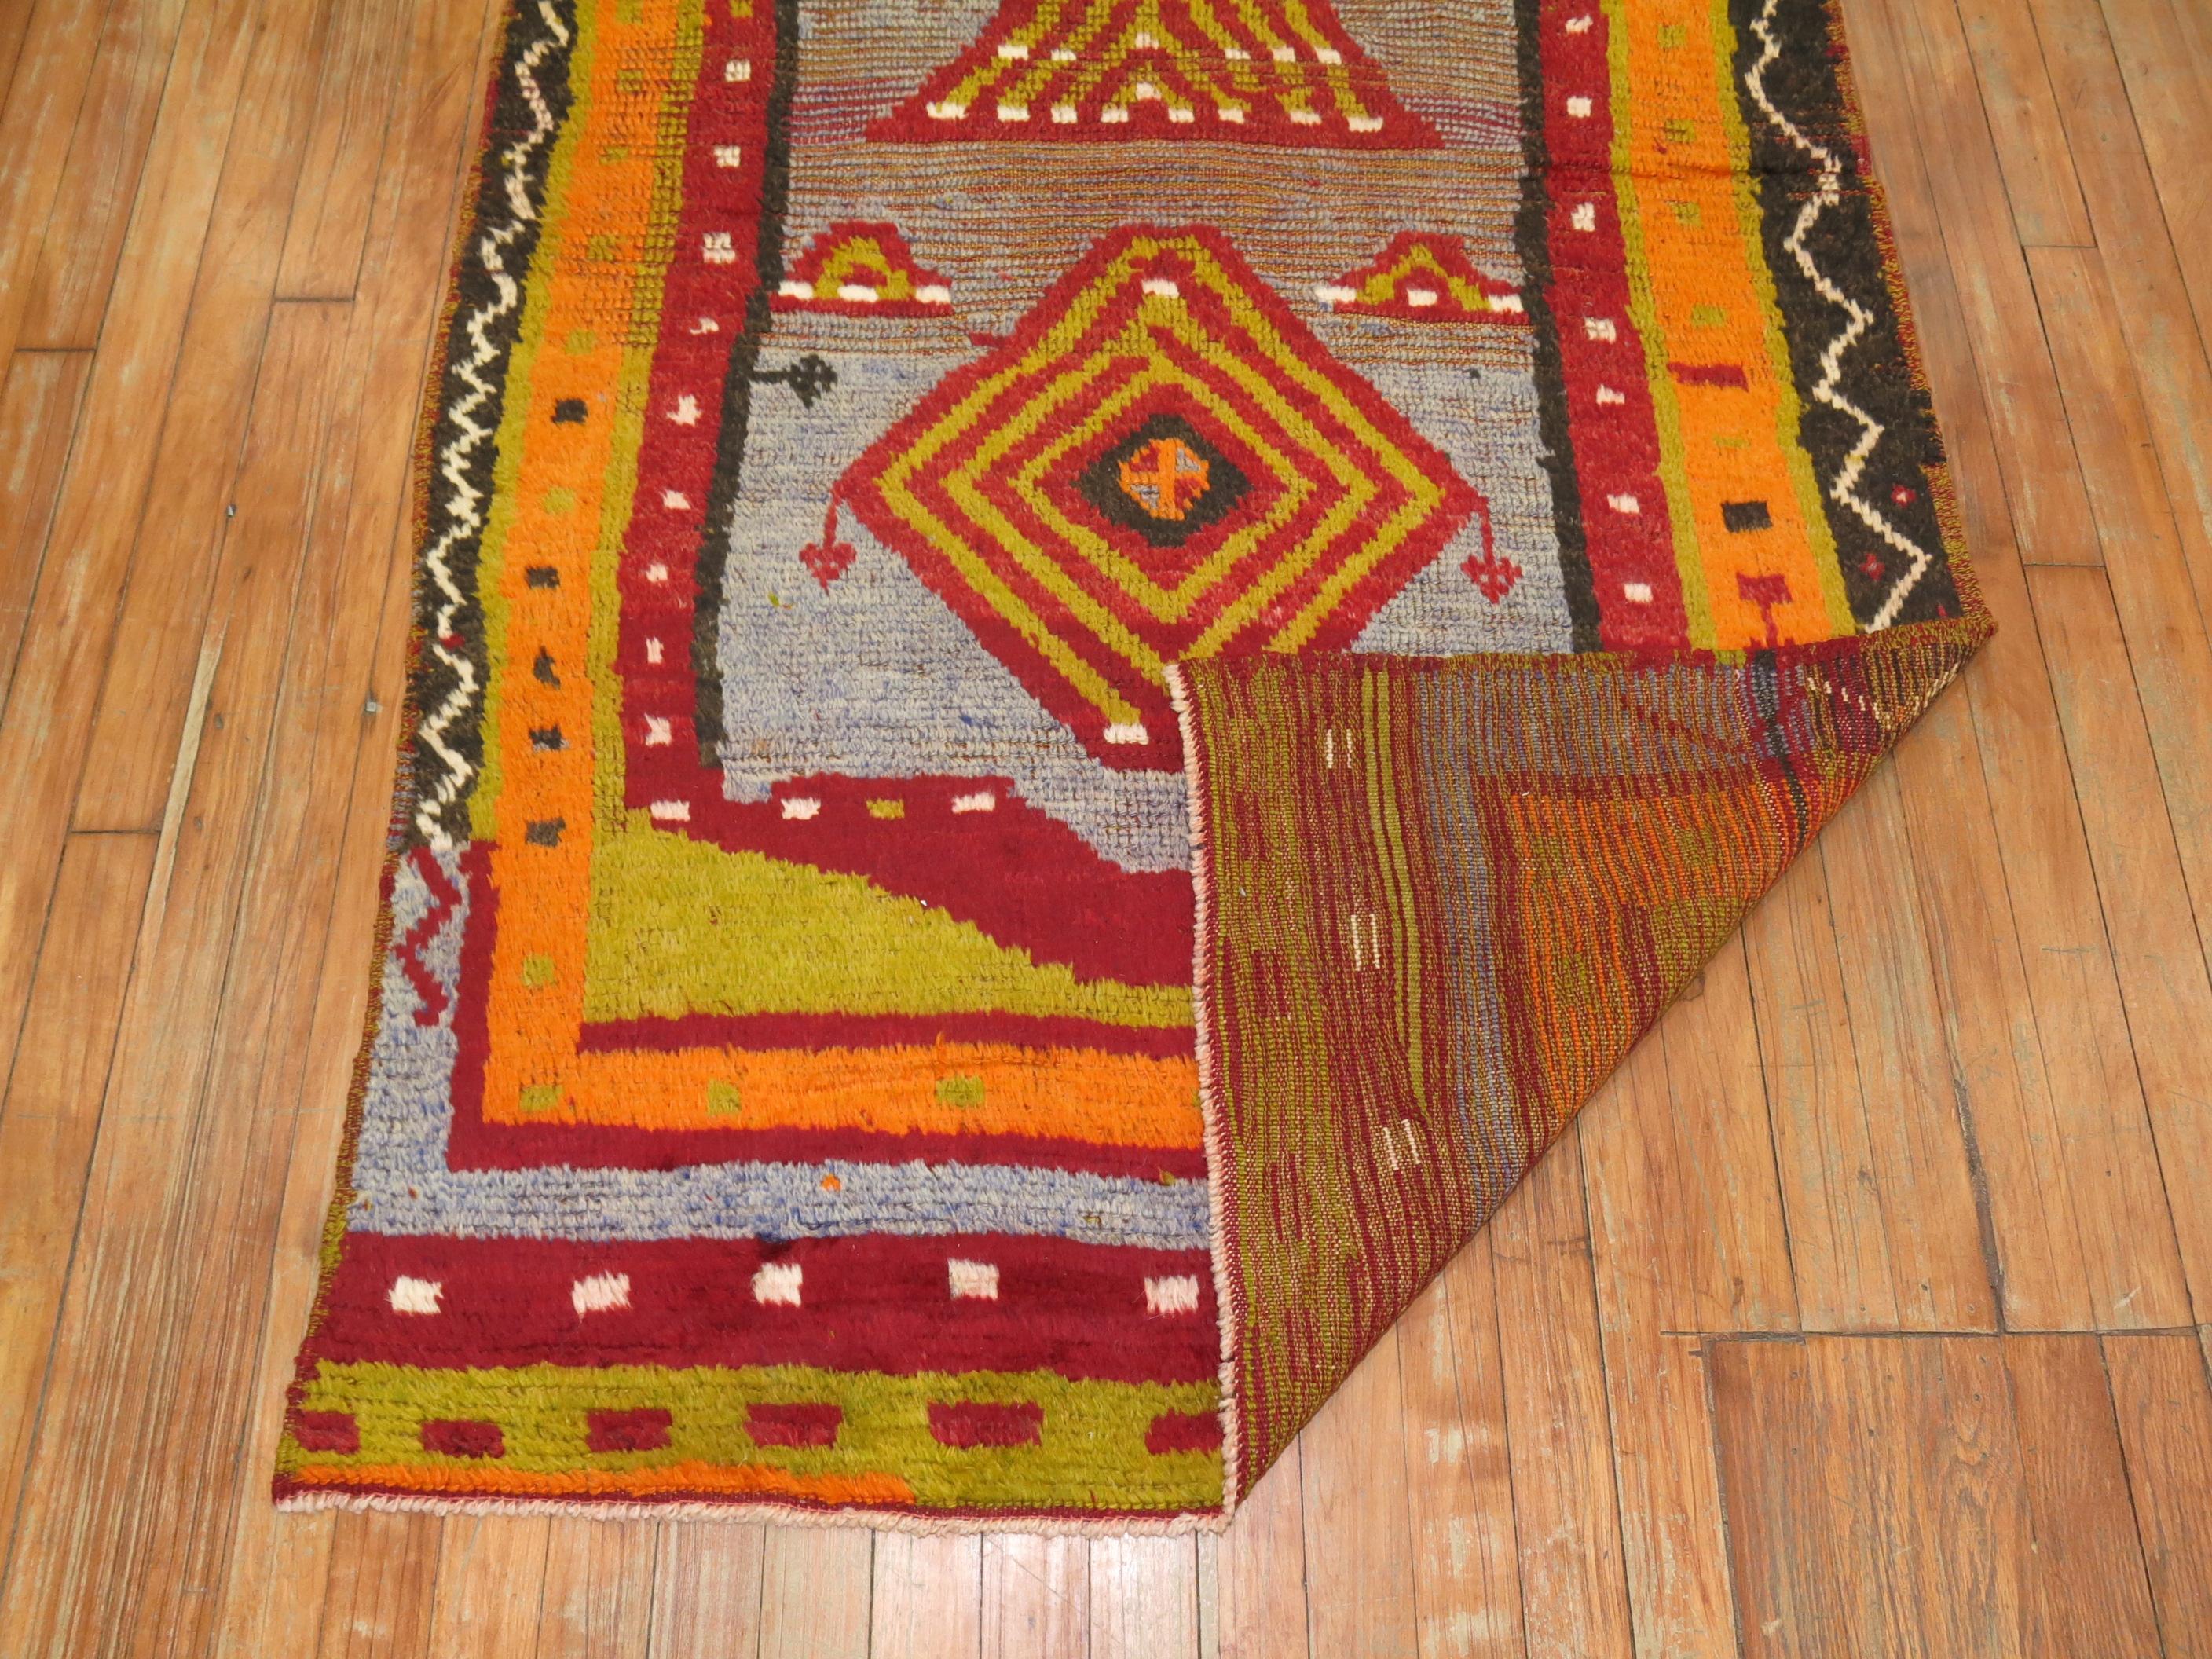 Dazzling and Auspicious best describe this Turkish rug with fuzzy angora wool.

Measures: 3'6'' x 5'9''.